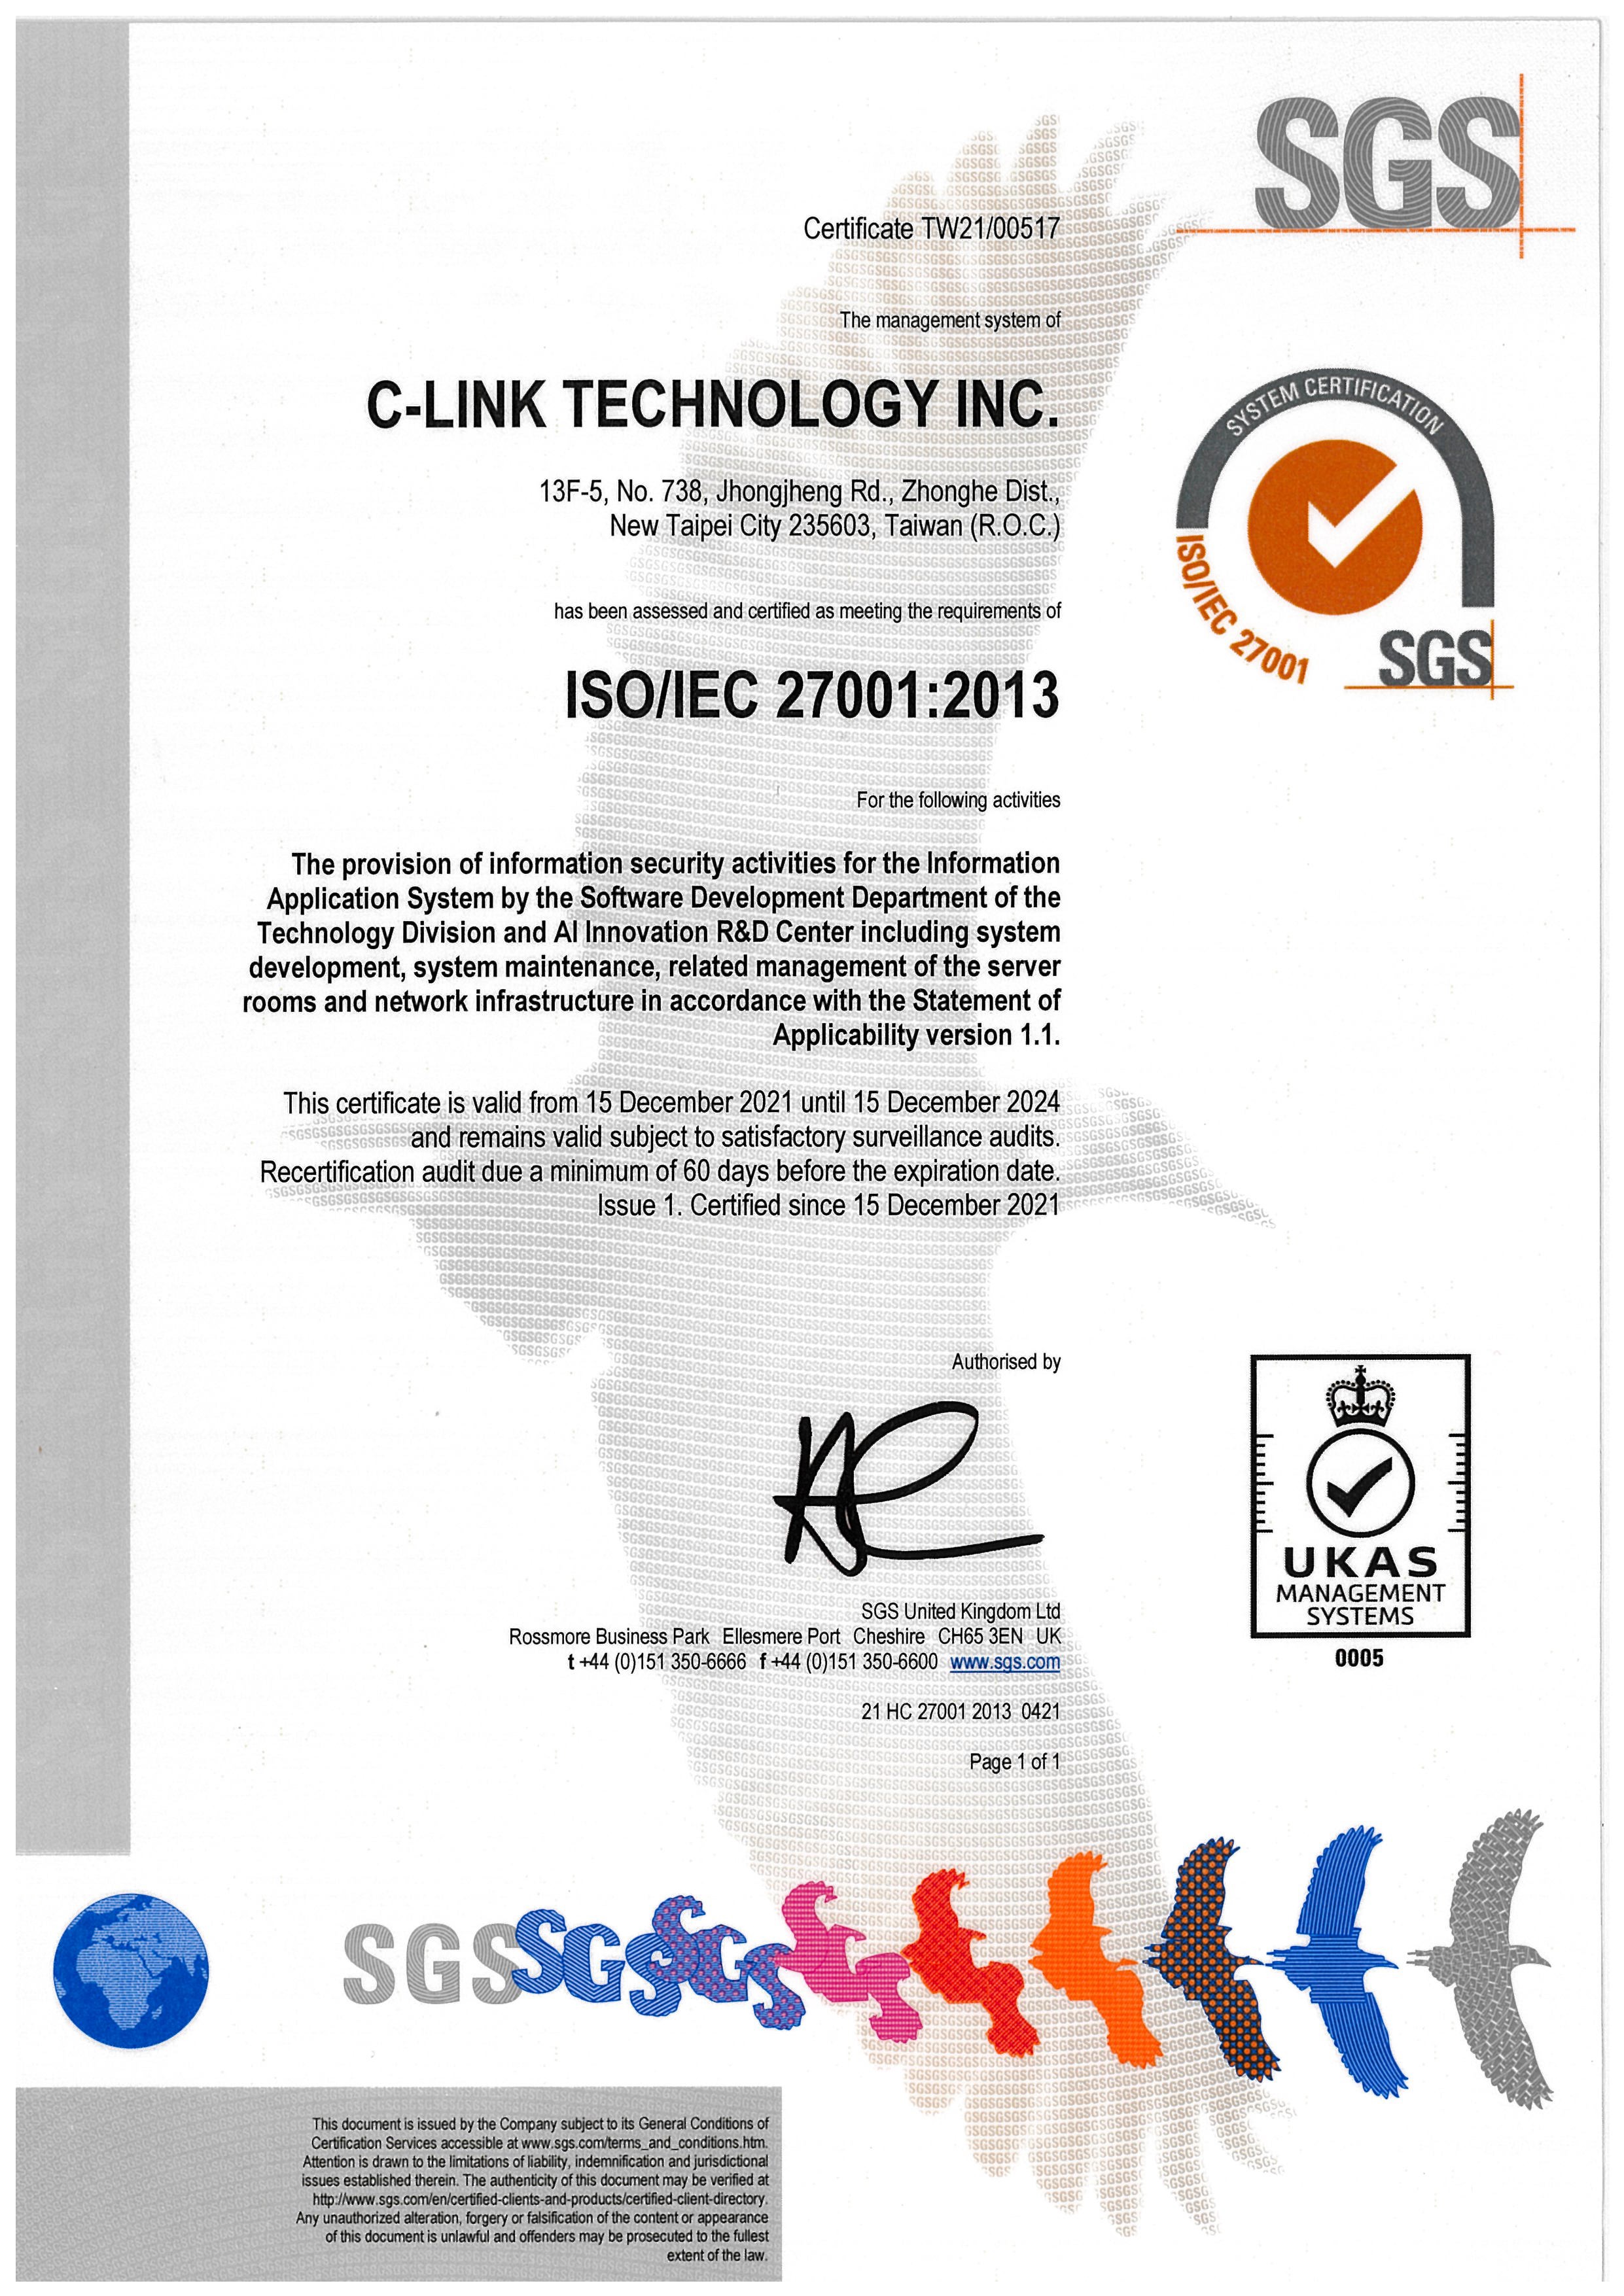 C-Link Technology INC. verified its information security level by obtaining ISO 27001